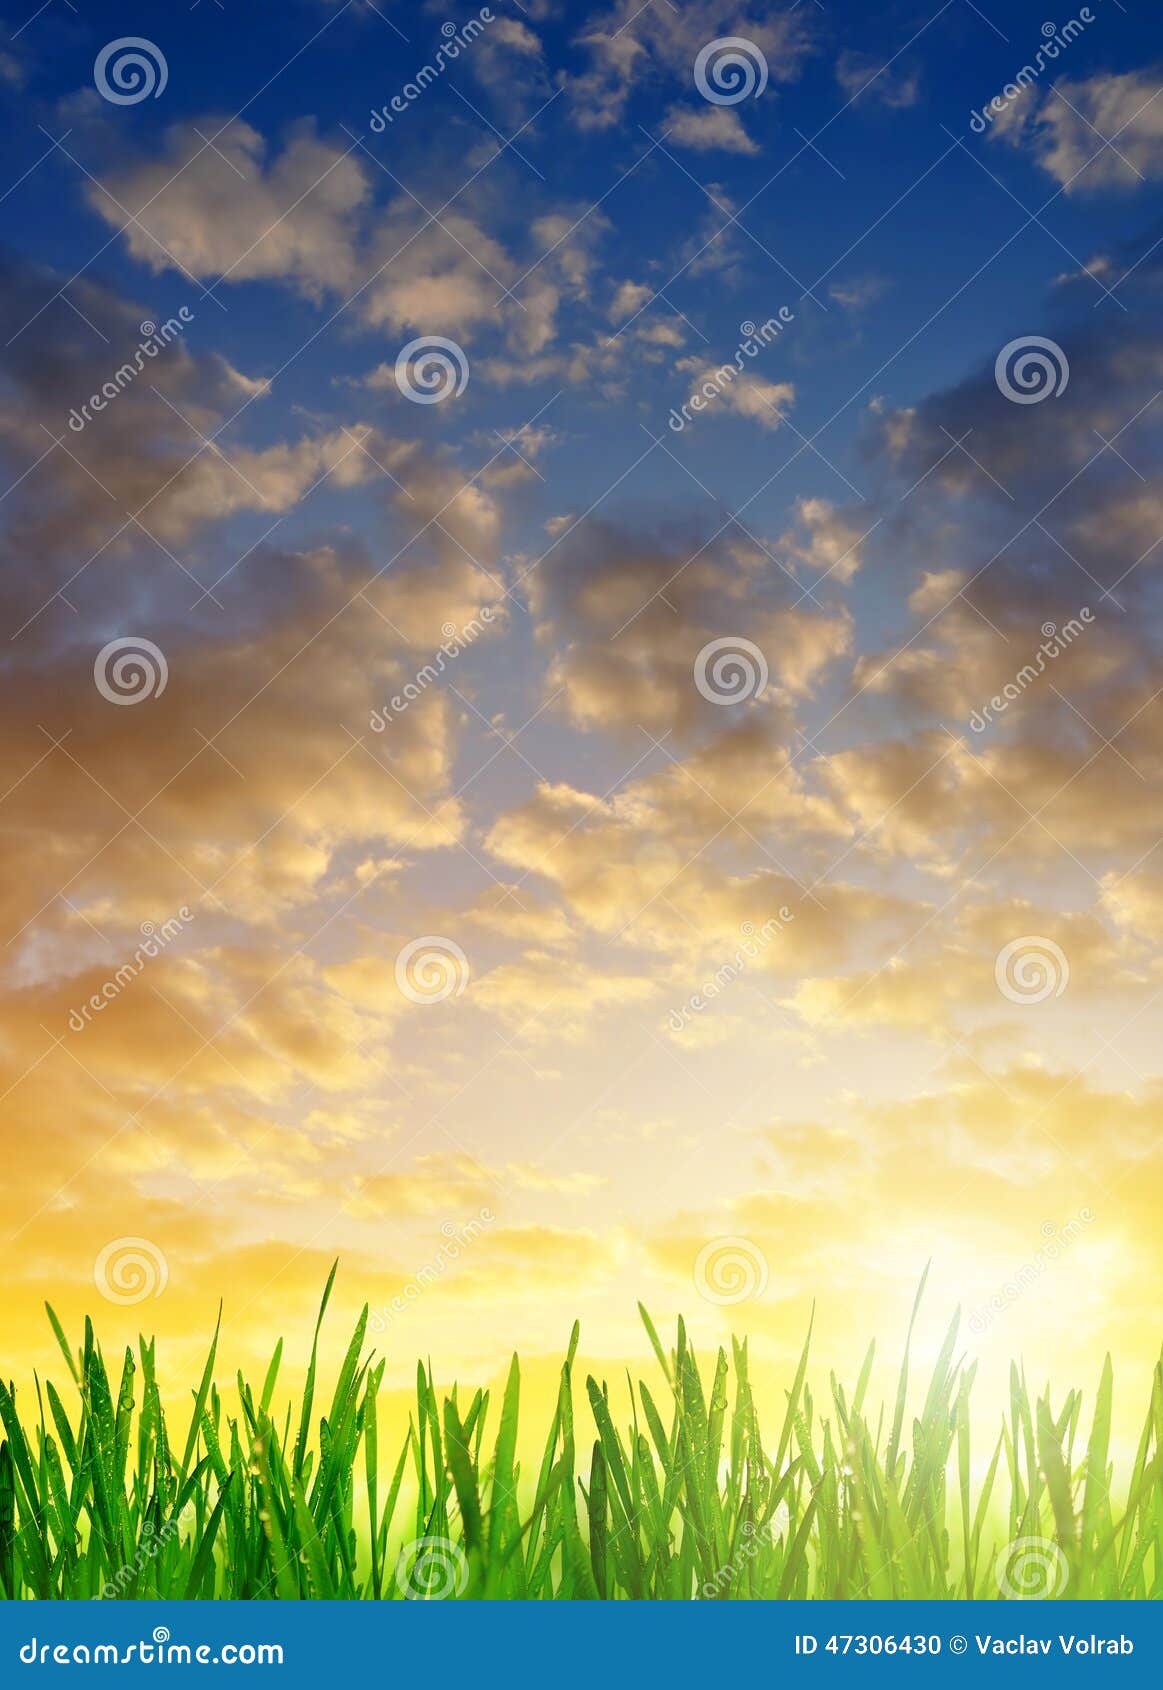 Fresh Dewy Green Grass at Sunrise Stock Photo - Image of lawn, grow